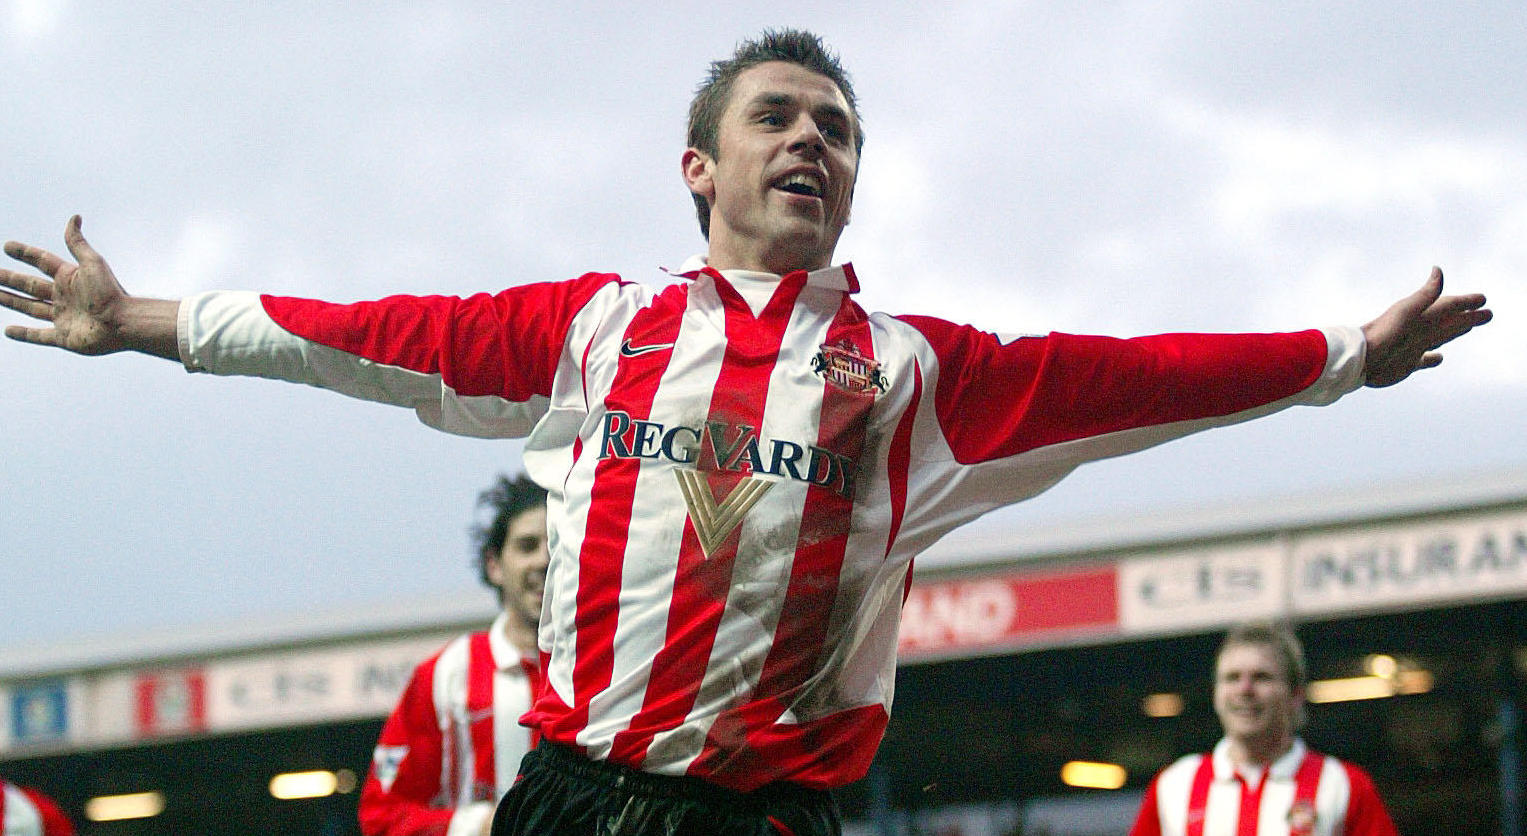 Sunderland legend Kevin Phillips confirmed as new South Shields manager - The Non-League Football Paper